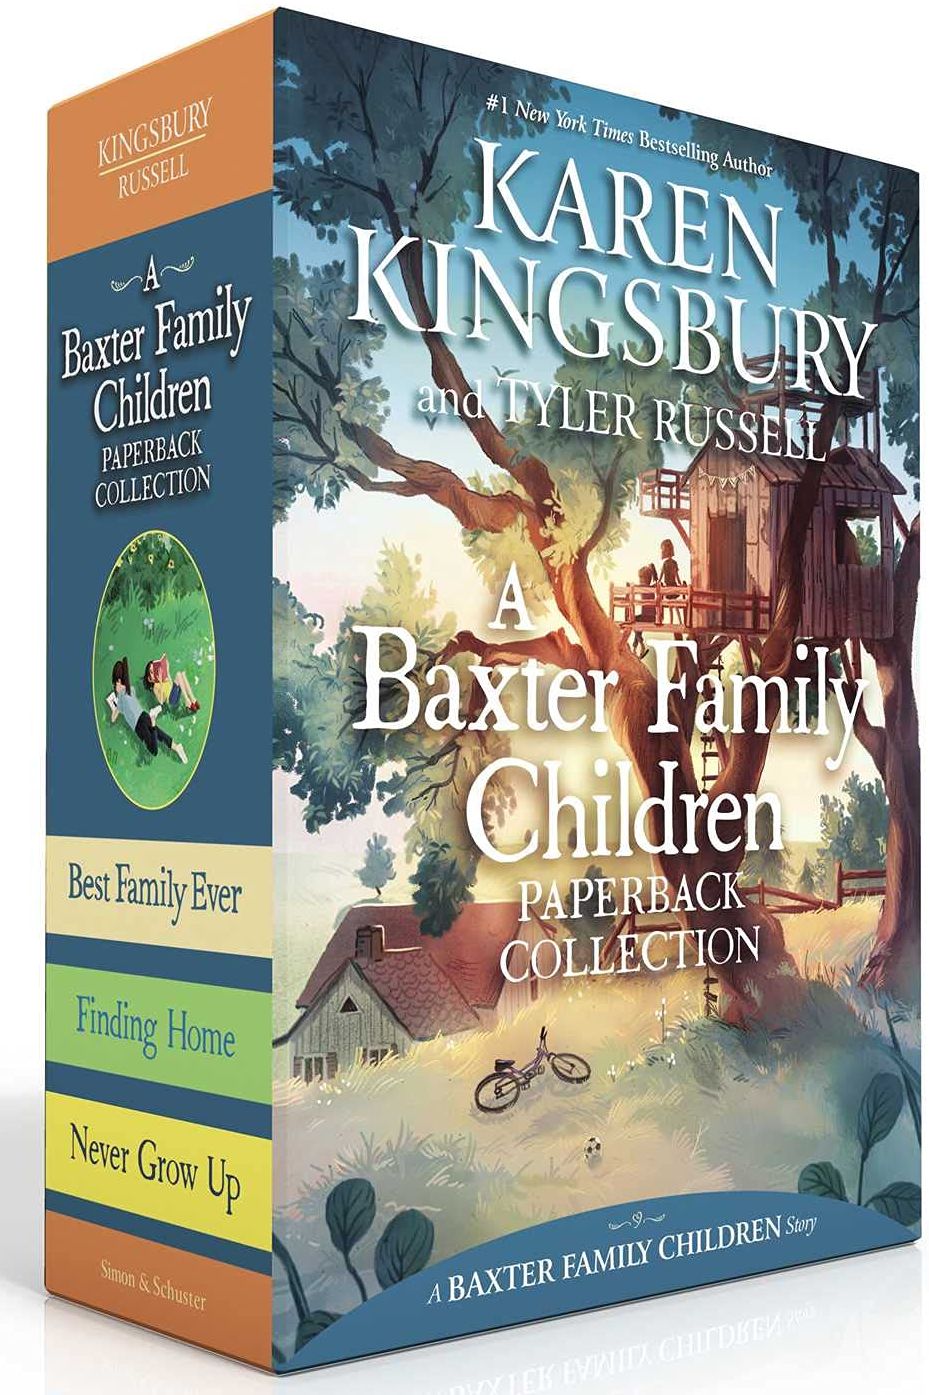 A Baxter Family Children Paperback Collection : Best Family Ever; Finding Home; Never Grow Up